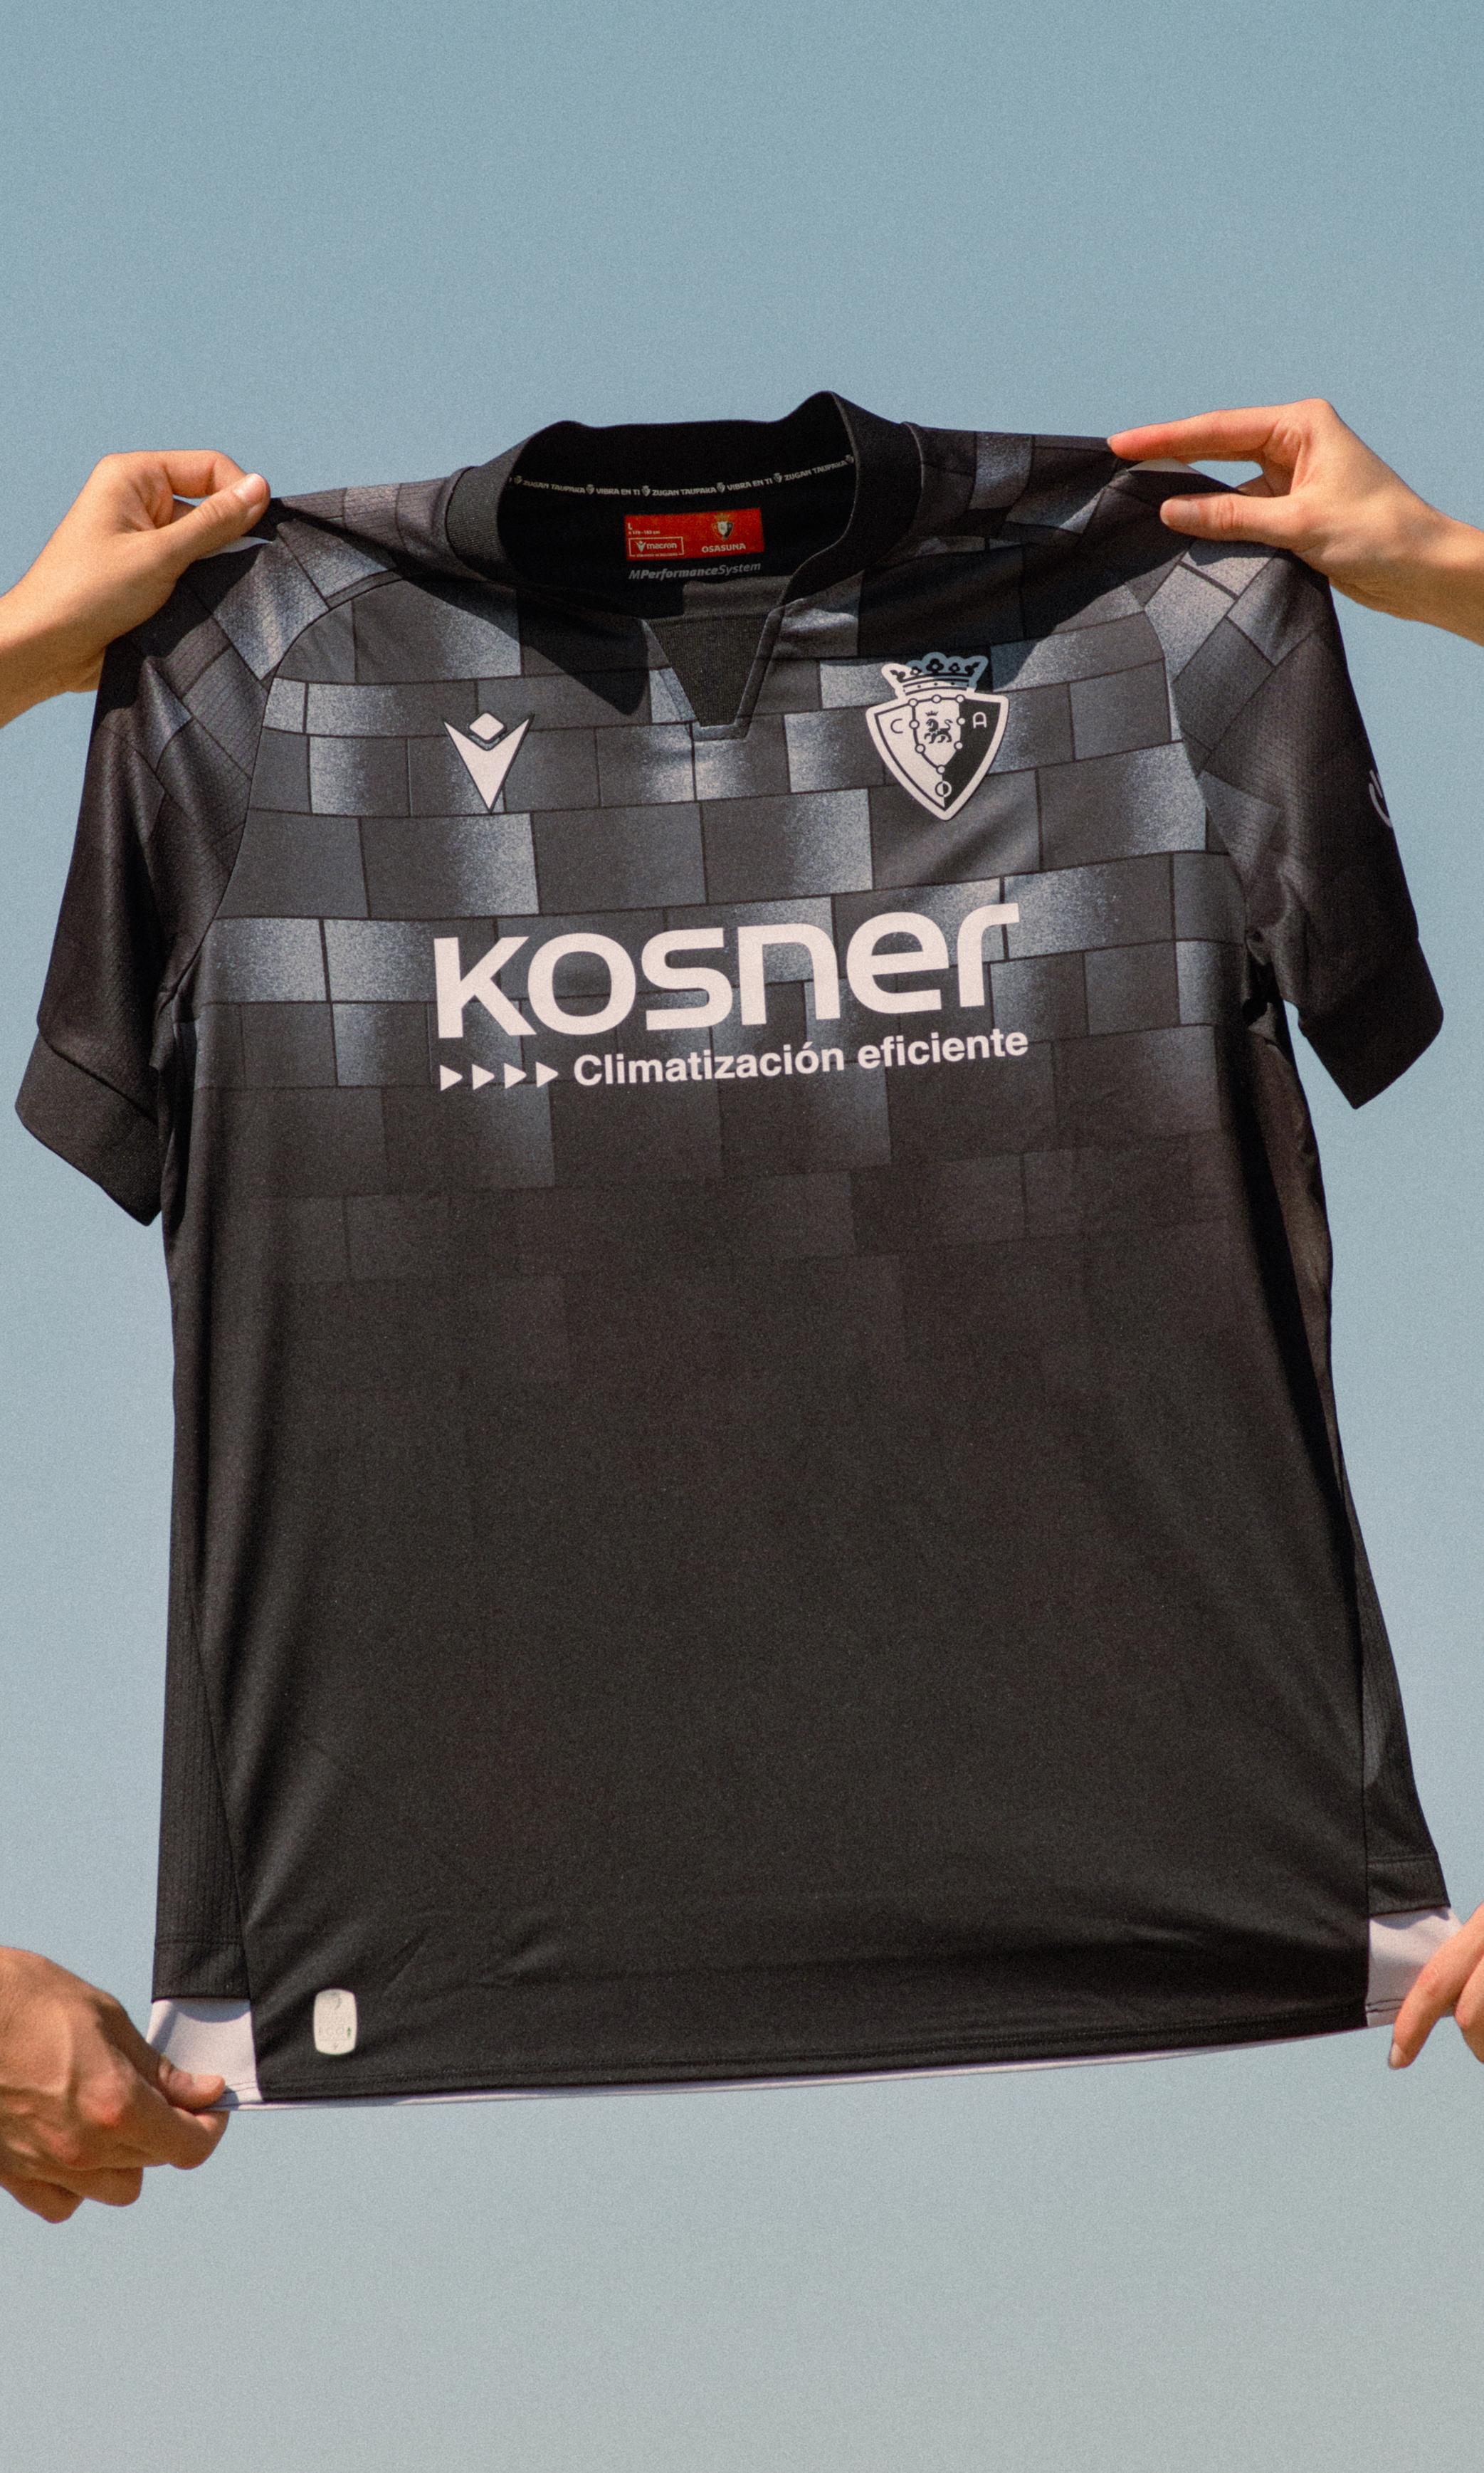 Osasuna unveils the alternative kit, a unique design inspired by the city walls at Pamplona's Citadel